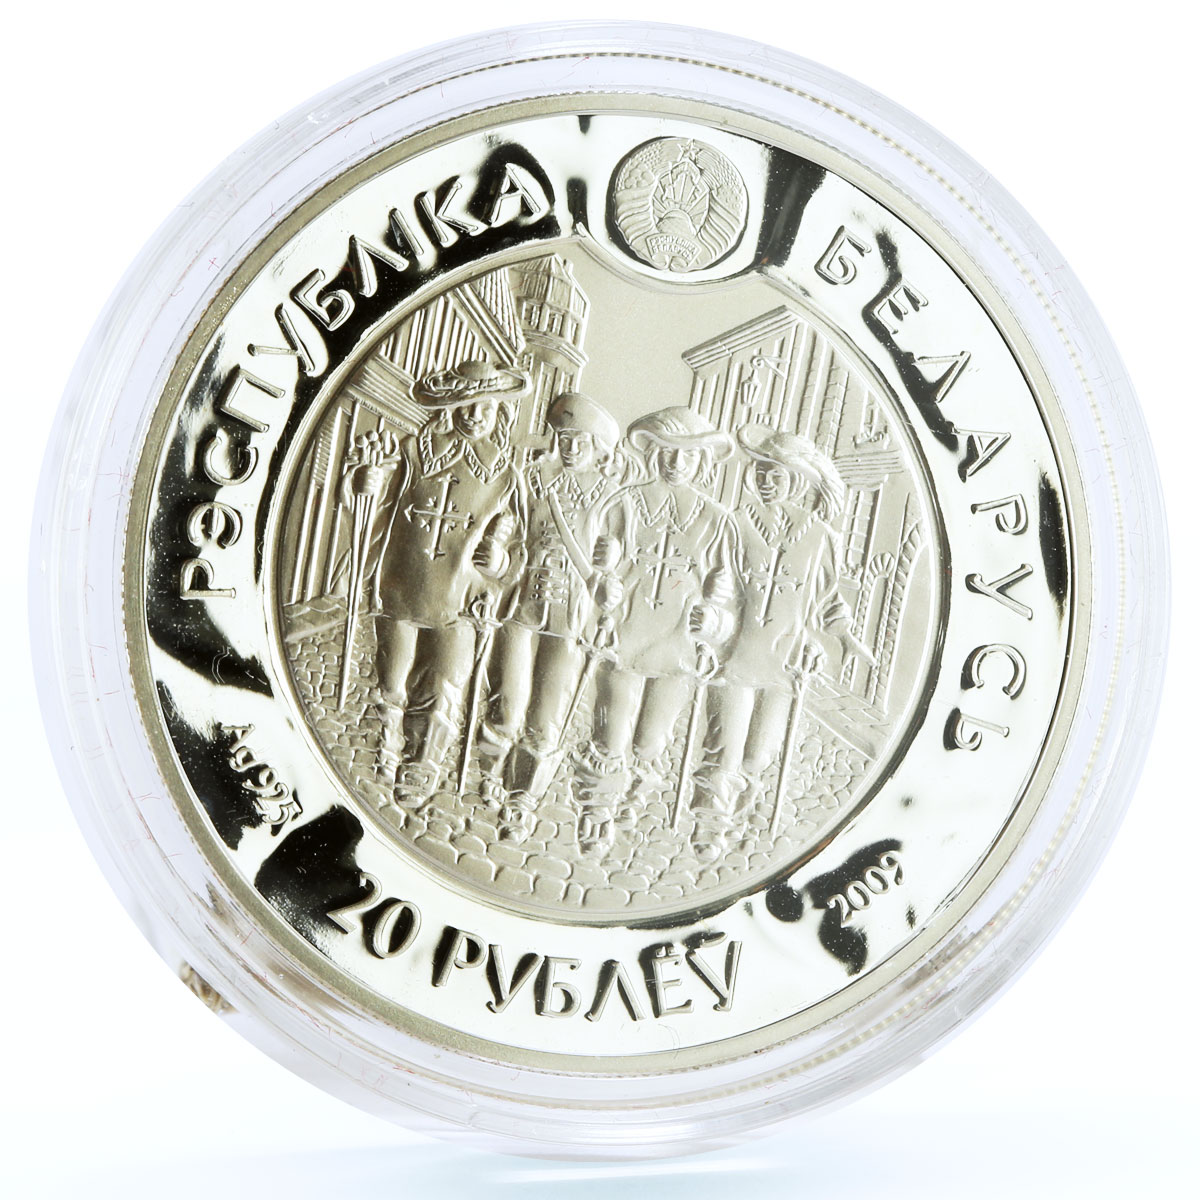 Belarus 20 rubles Three Musketeers D'Artagnan Literature proof silver coin 2009